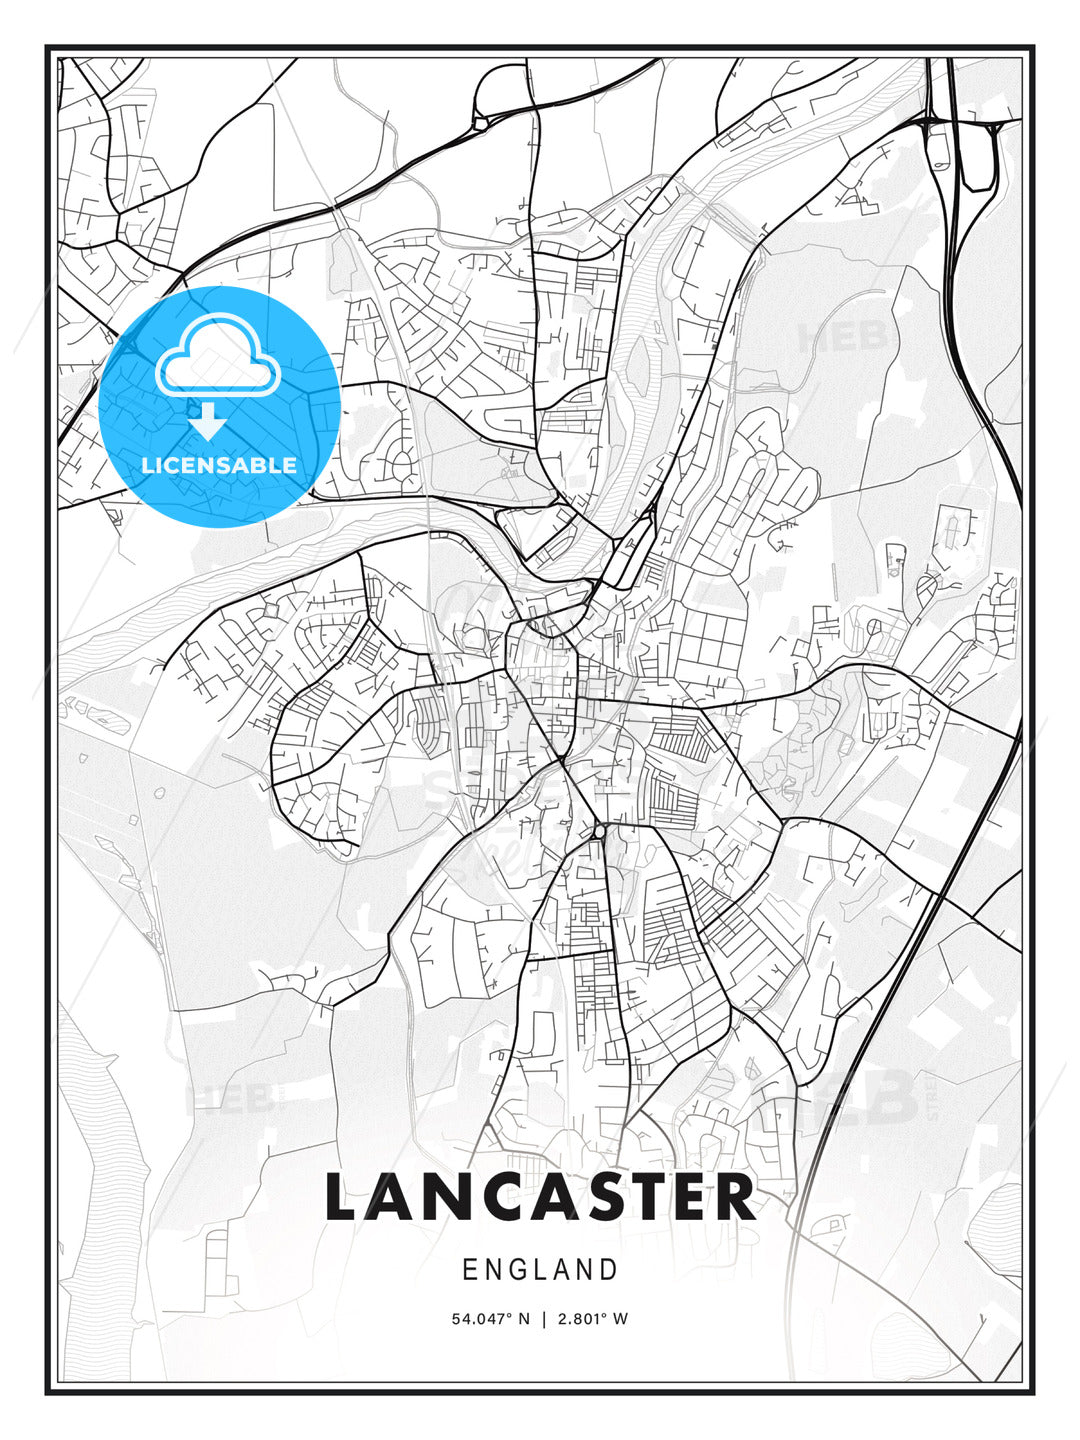 Lancaster, England, Modern Print Template in Various Formats - HEBSTREITS Sketches